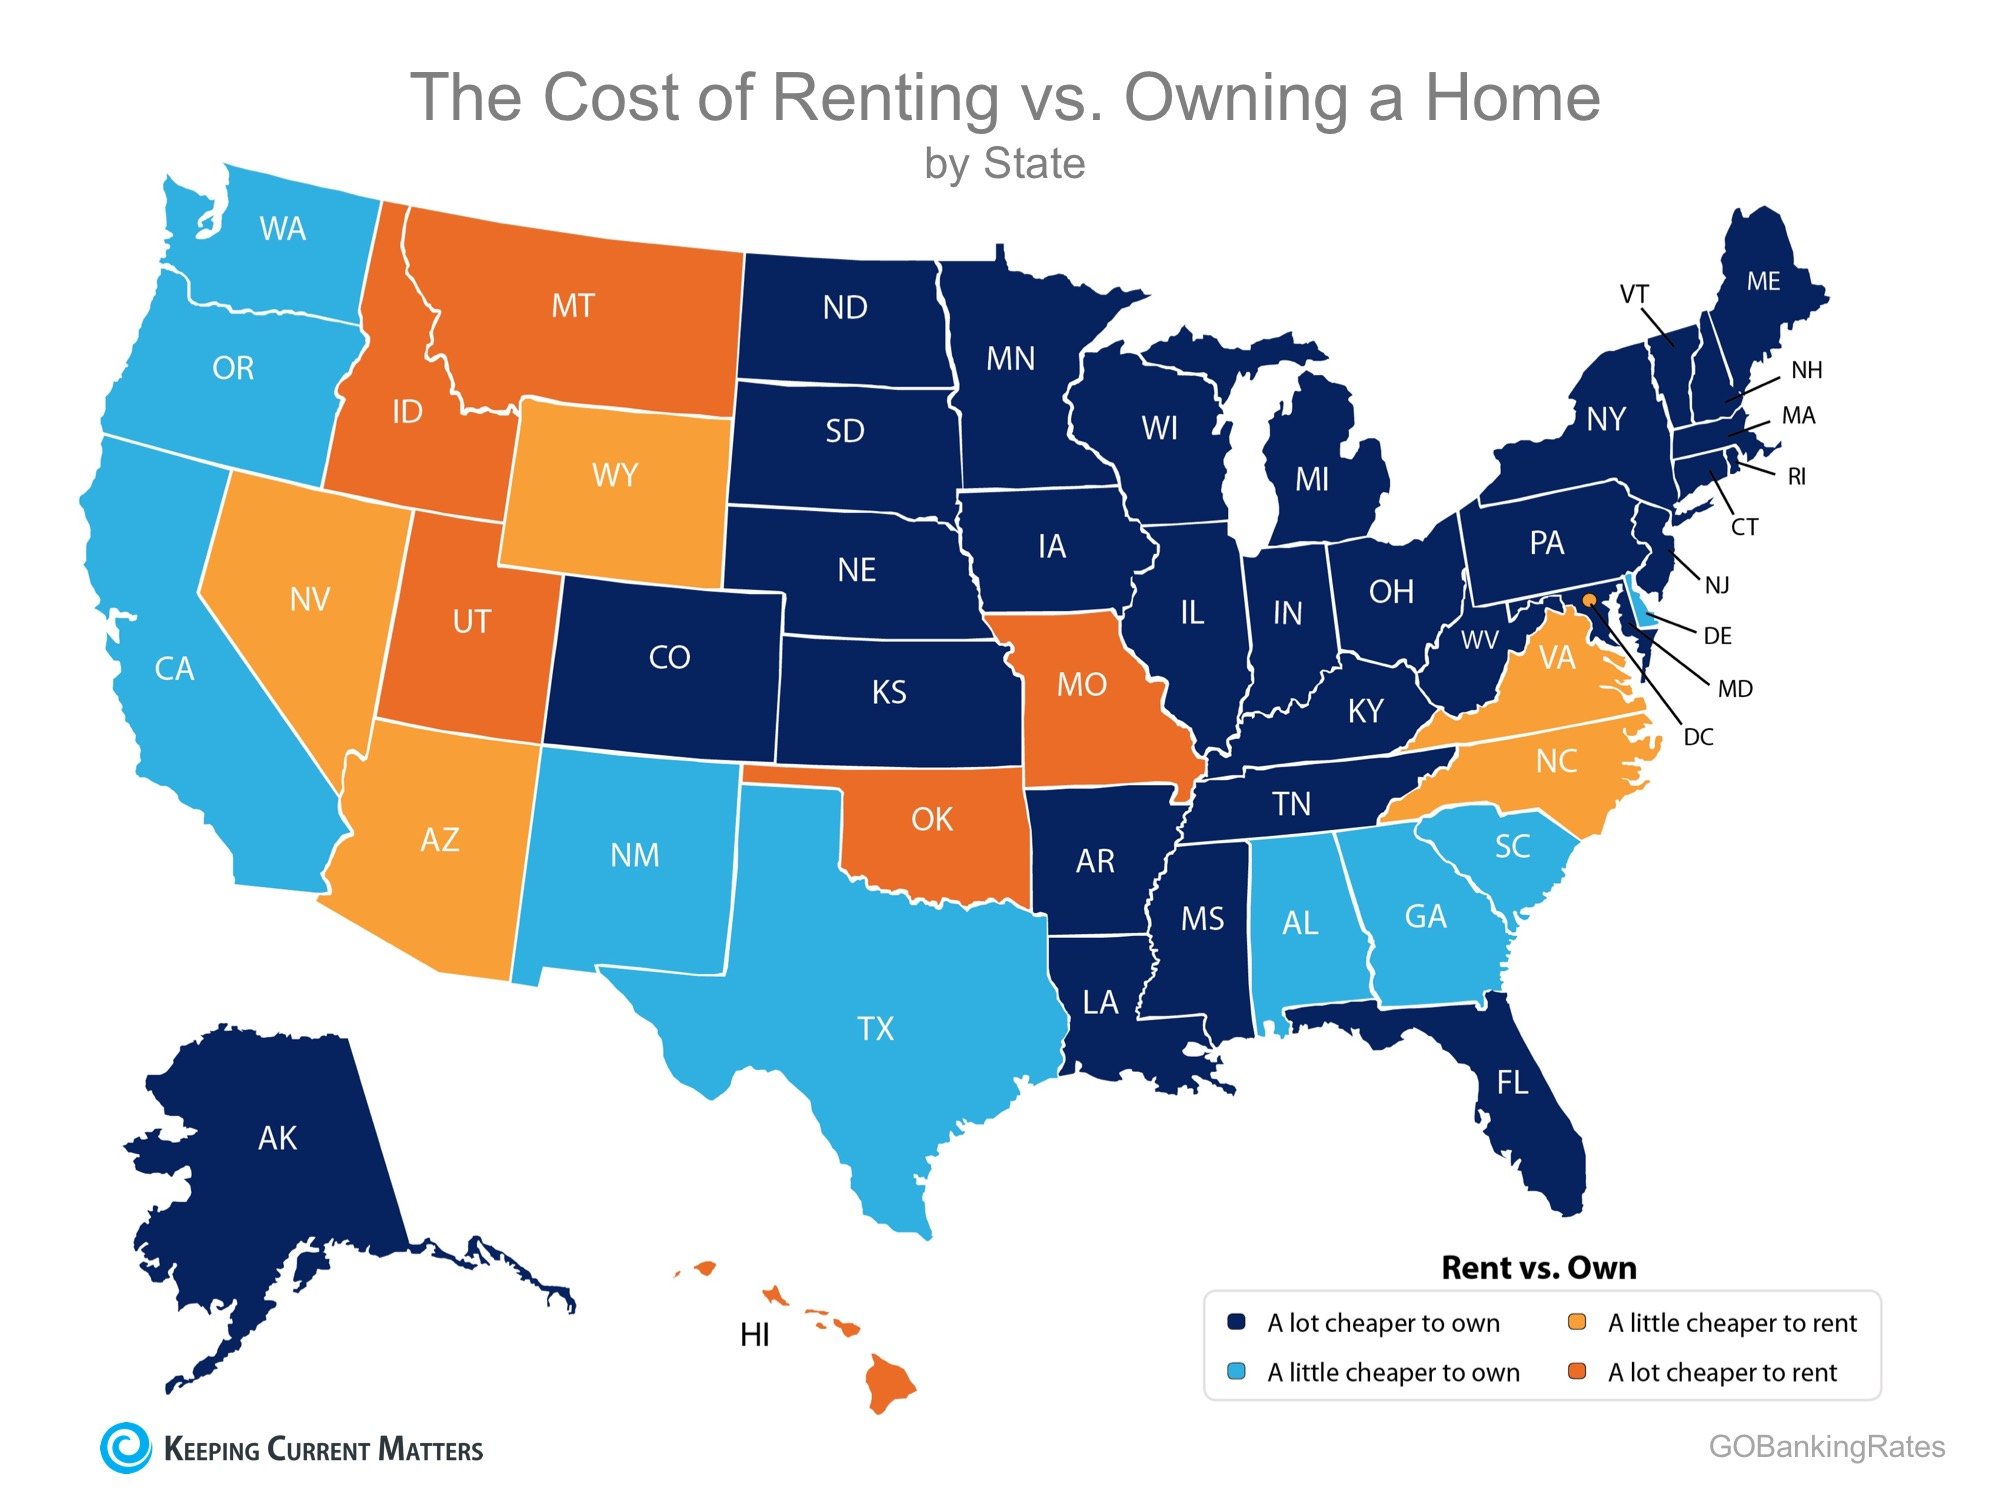 Buying Remains Cheaper Than Renting in 39 States! | Keeping Current Matters